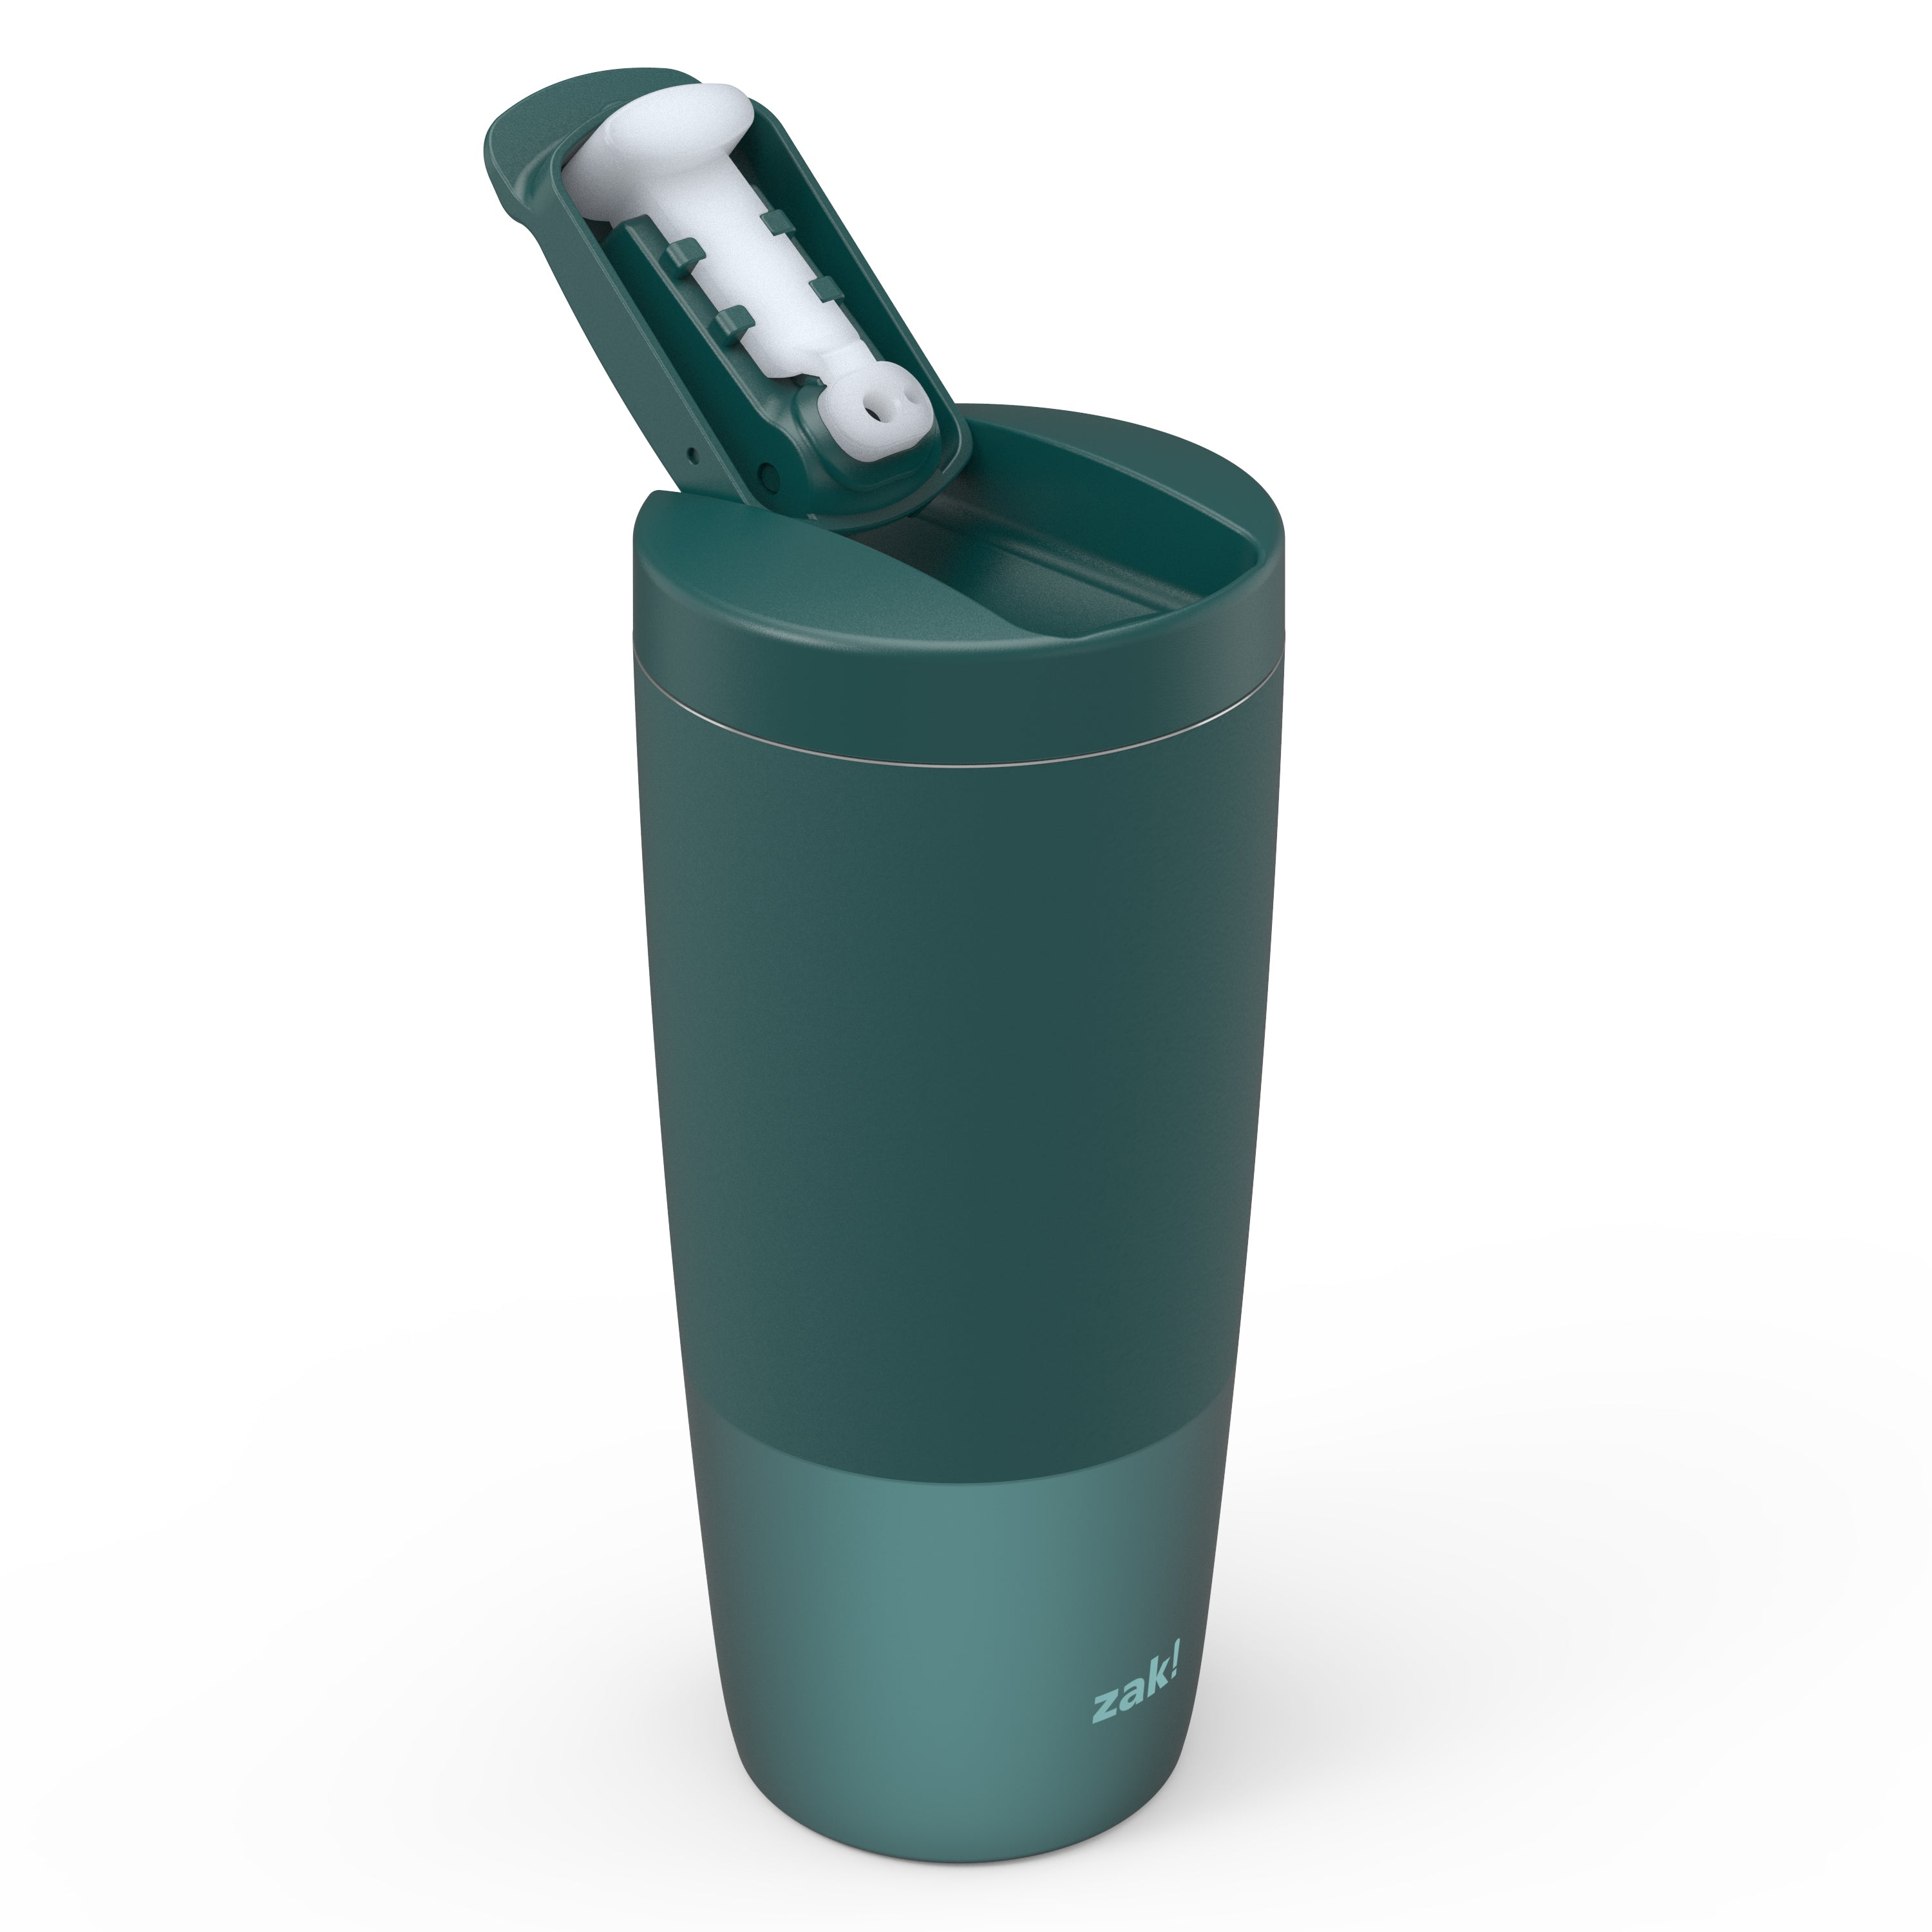 Zak Designs 30oz Stainless Steel Insulated Travel Tumbler with 2-in-1 Lid for Hot & Cold - Jade